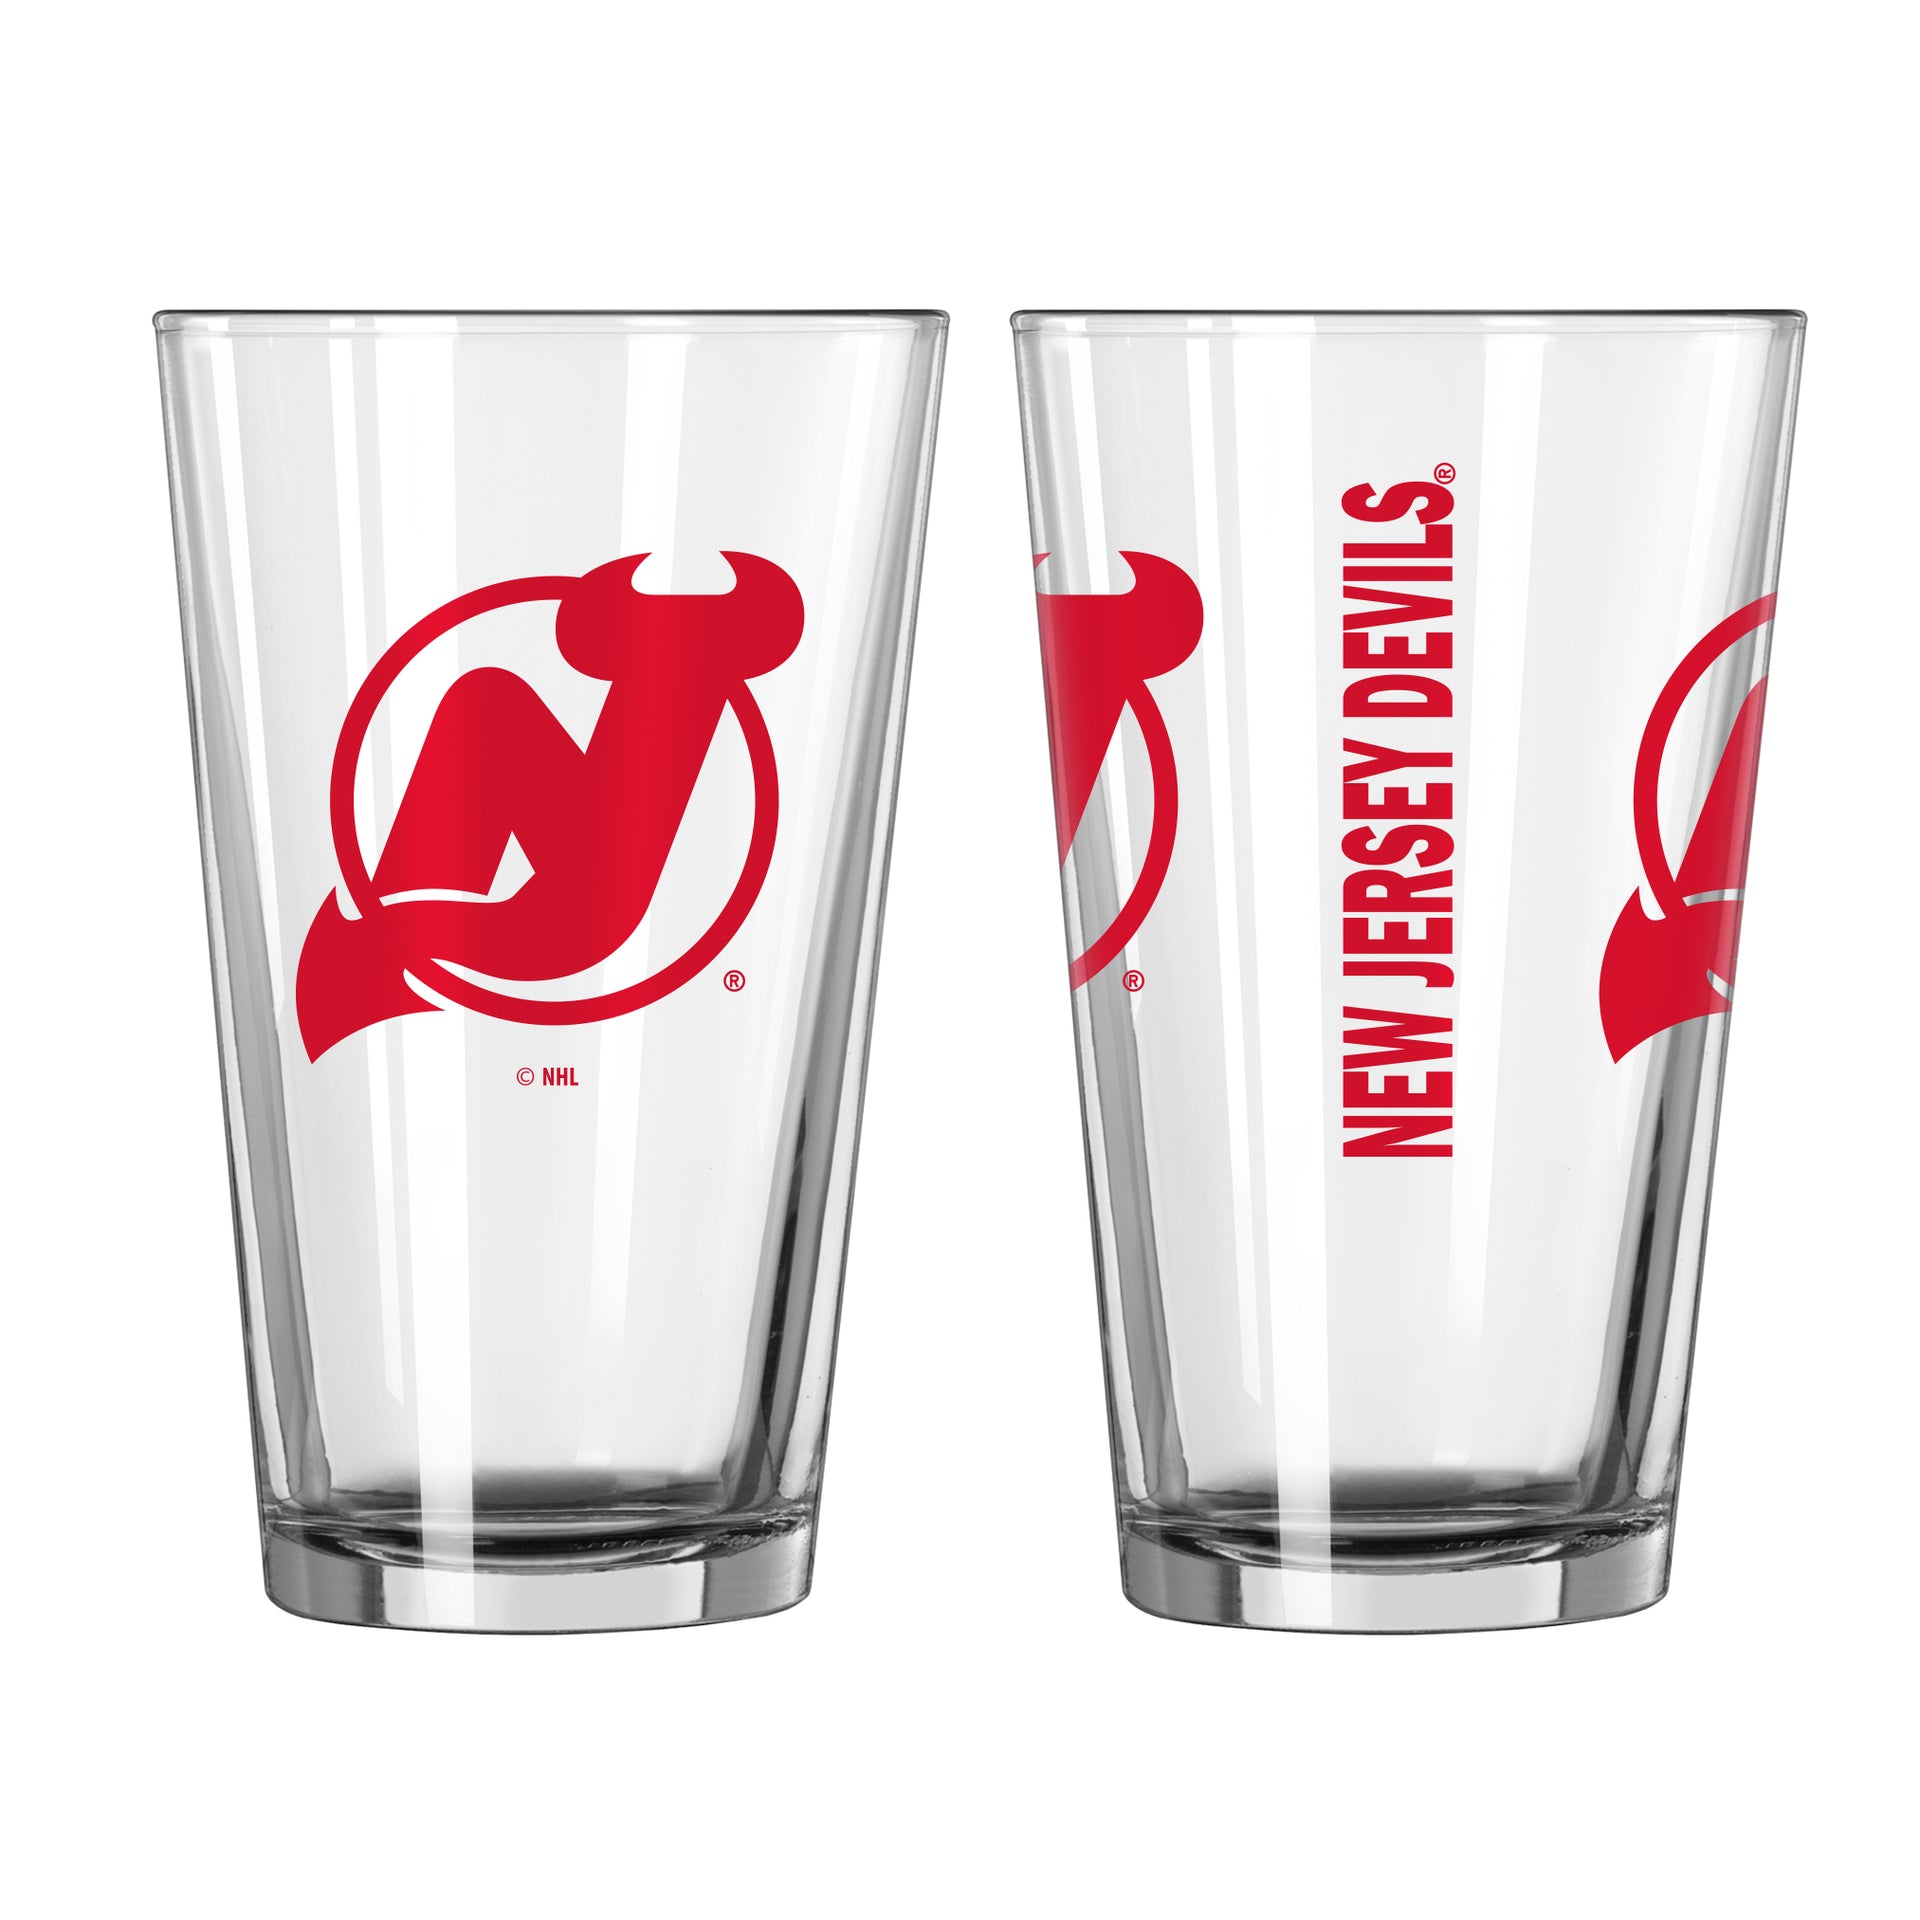 New Jersey Devils Game Day Pint Glass - Dynasty Sports & Framing 